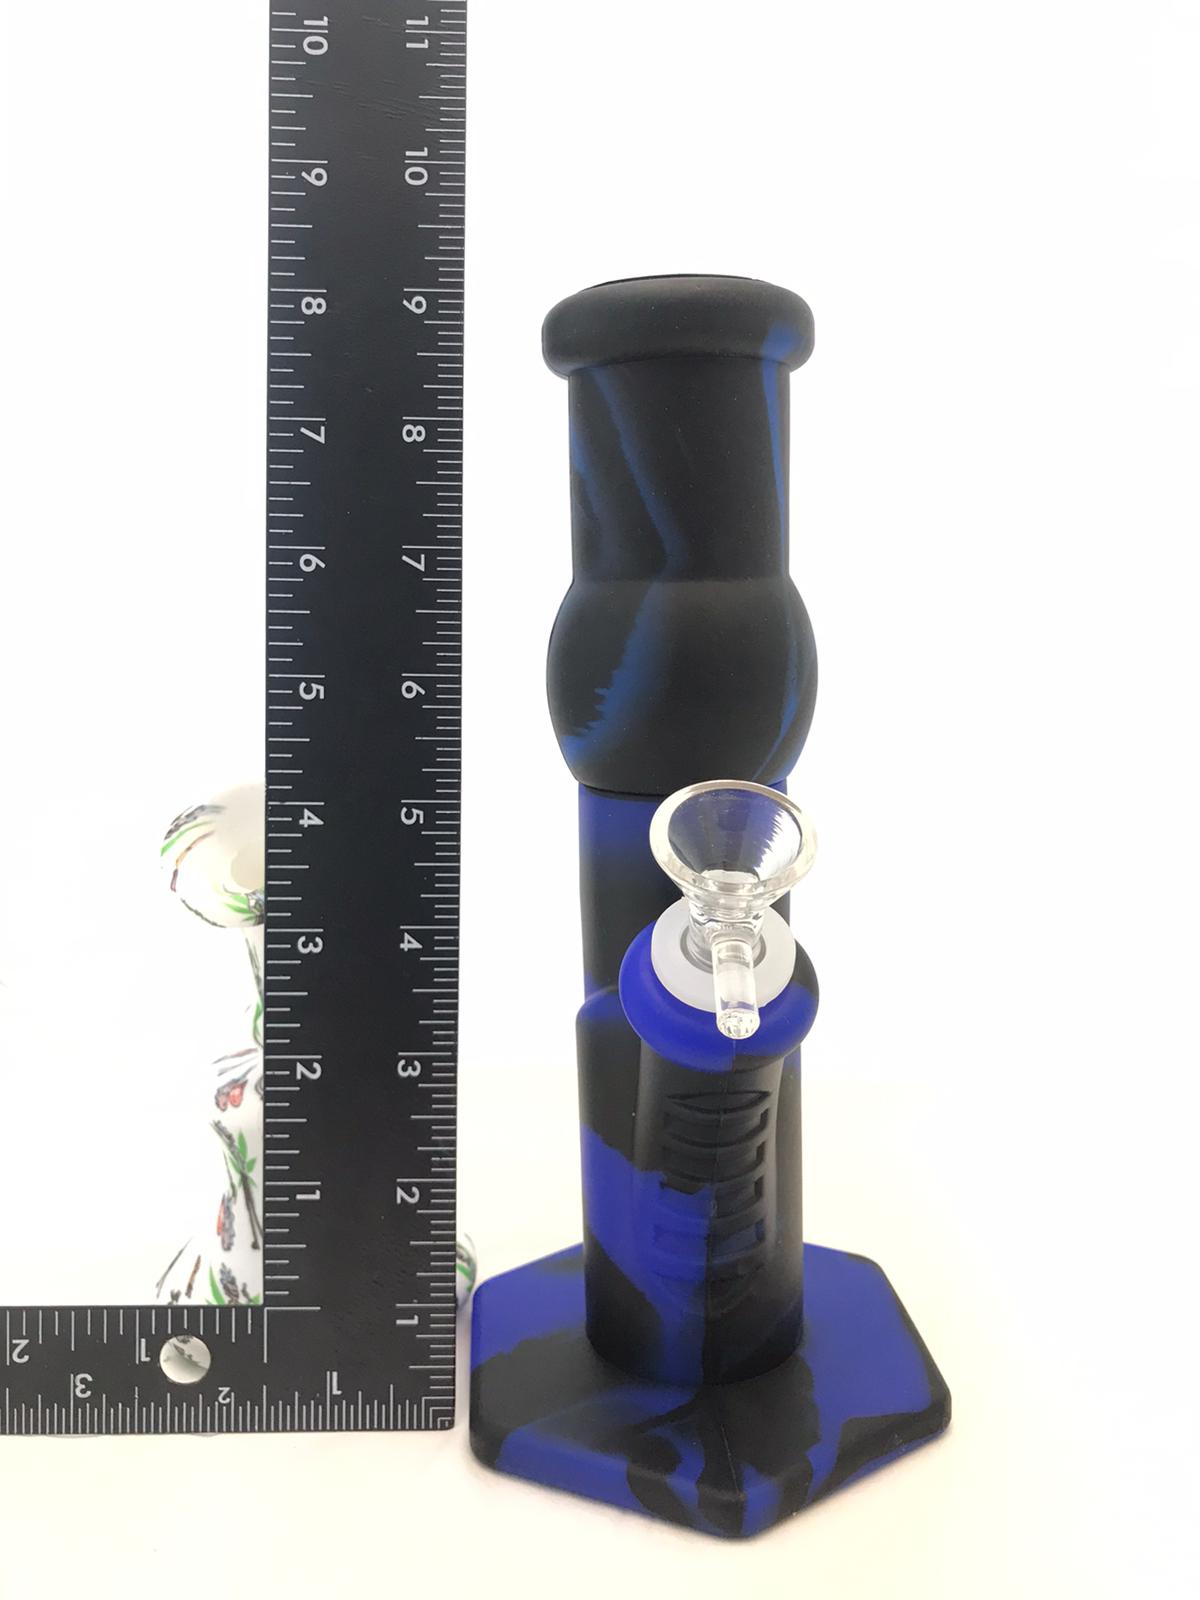 Silicon tall bong colors BLACK/BLUES